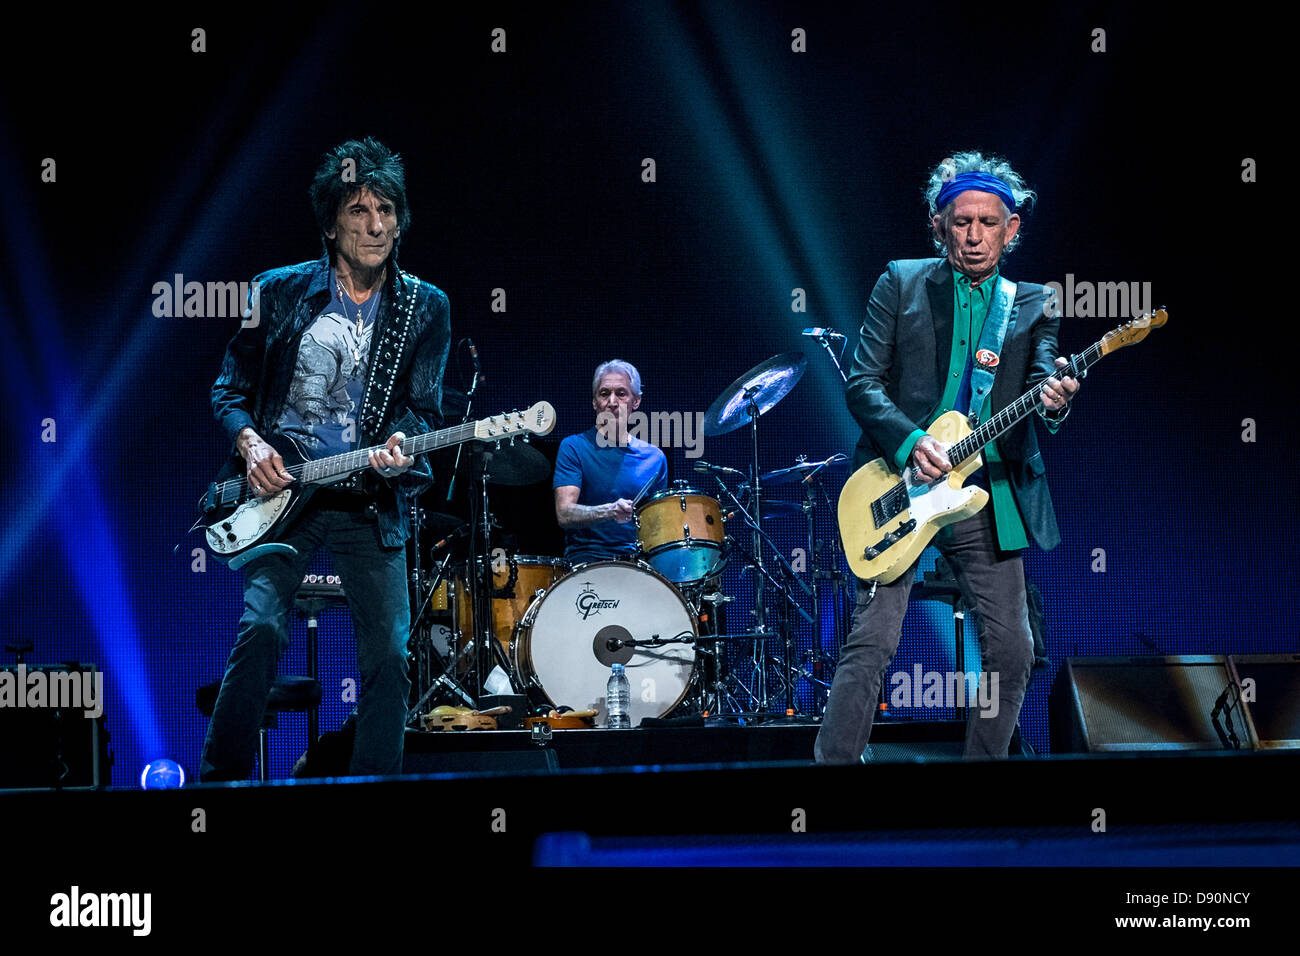 Toronto, Ontario, Canada. June 6, 2013. RON WOOD, CHARLIE WATTS and KEITH RICHARDS, of The Rolling Stones, on tour in their 50th year of playing as a band, work their magic at the Air Canada Centre Credit:  ZUMA Press, Inc./Alamy Live News Stock Photo